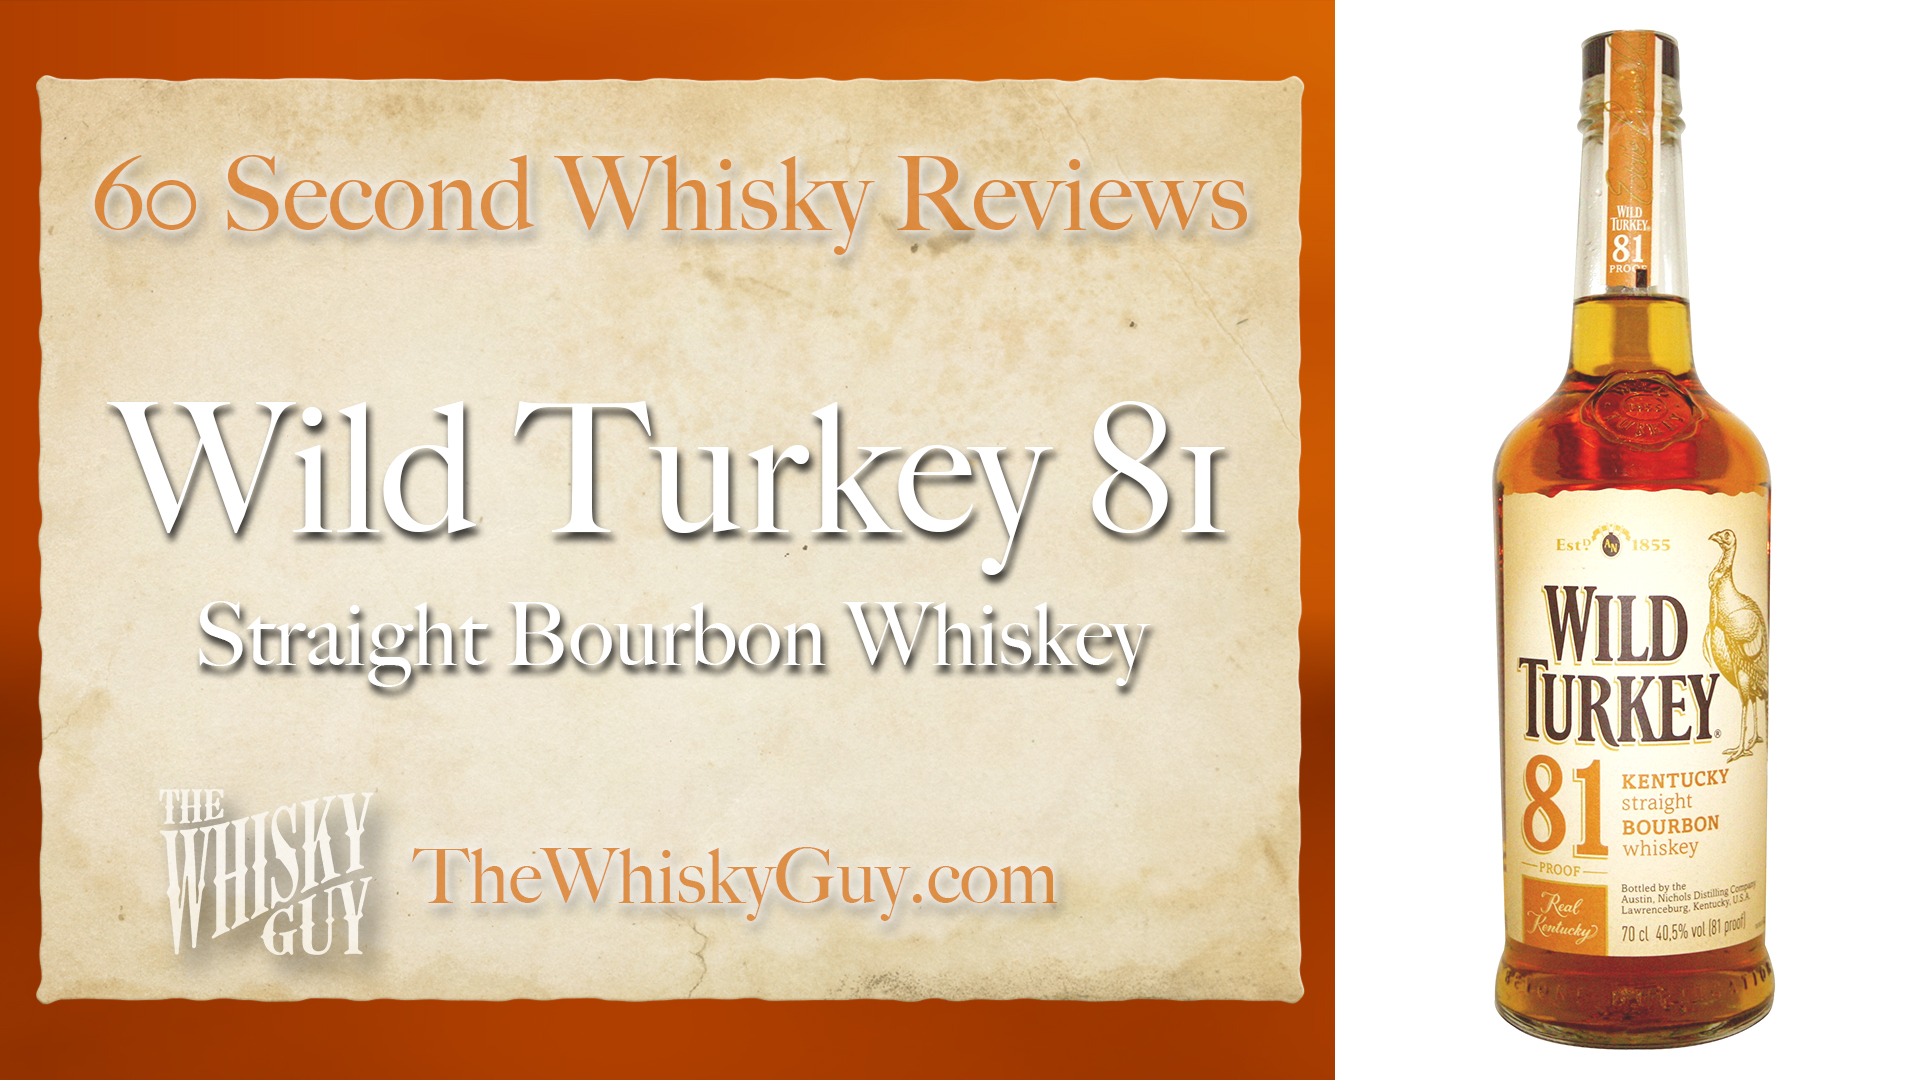 Does Wild Turkey 81 Straight Bourbon Whiskey belong in your liquor cabinet? Is it worth the price at the bar? Give The Whisky Guy 60 seconds and find out! In just 60 seconds, The Whisky Guy reviews Irish Whiskey, Scotch Whisky, Single Malt, Canadian Whisky, Bourbon Whiskey, Japanese Whisky and other whiskies from around the world. Find more at TheWhiskyGuy.com. All original content © Ari Shapiro - TheWhiskyGuy.com